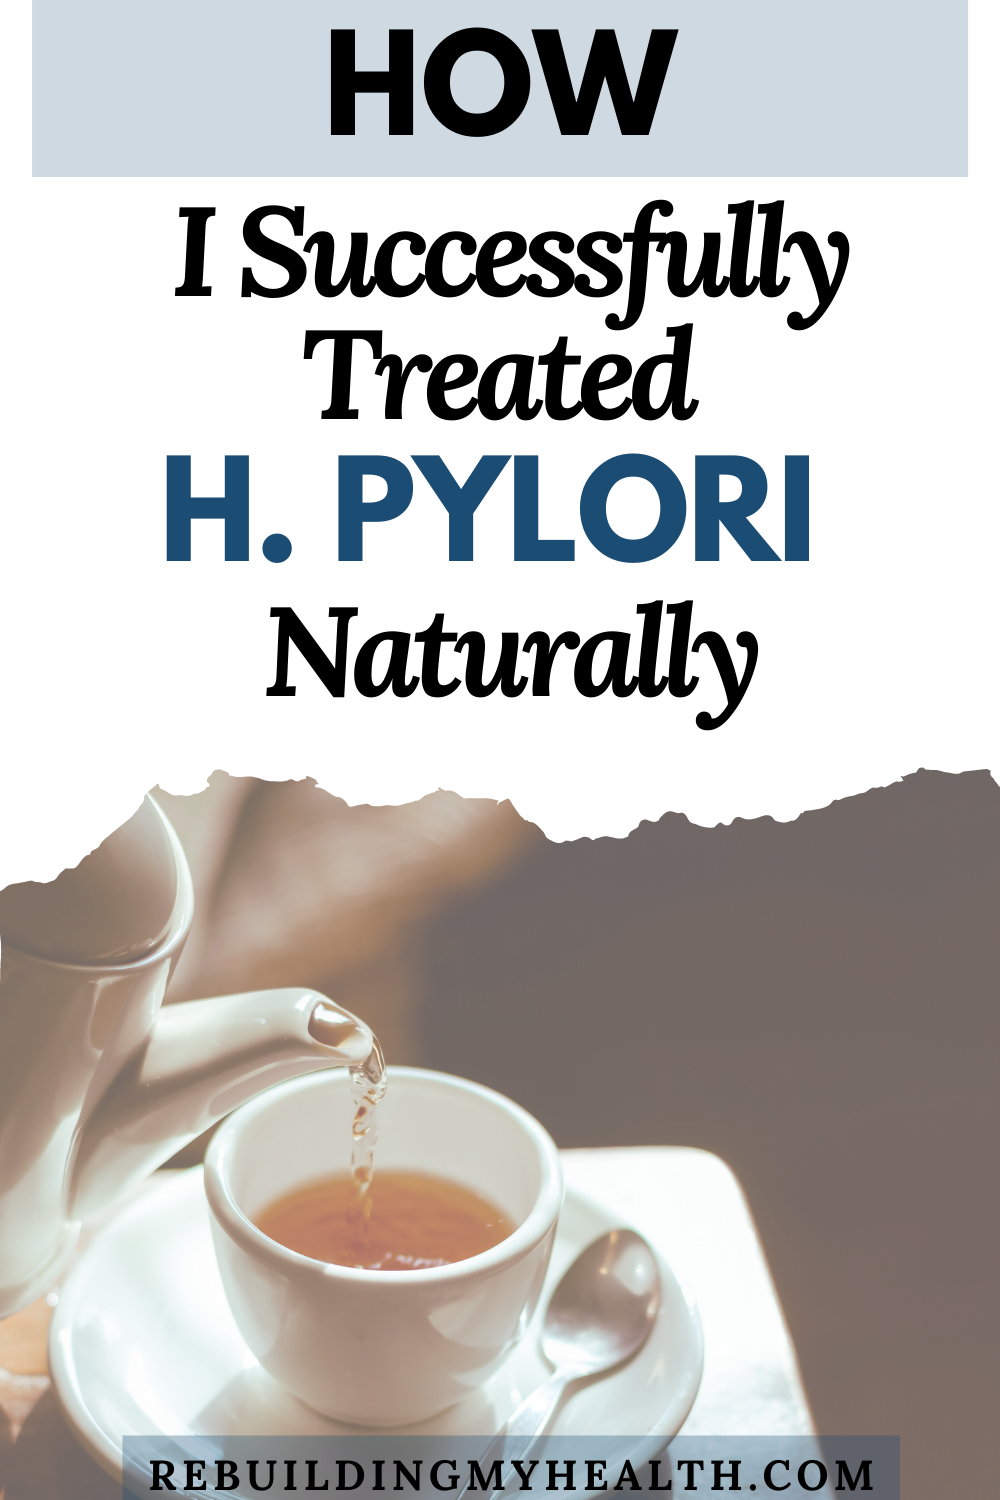 Learn about treating H. pylori naturally. I followed a natural treatment for H. pylori and Candida overgrowth instead of taking antibiotics - and it worked.